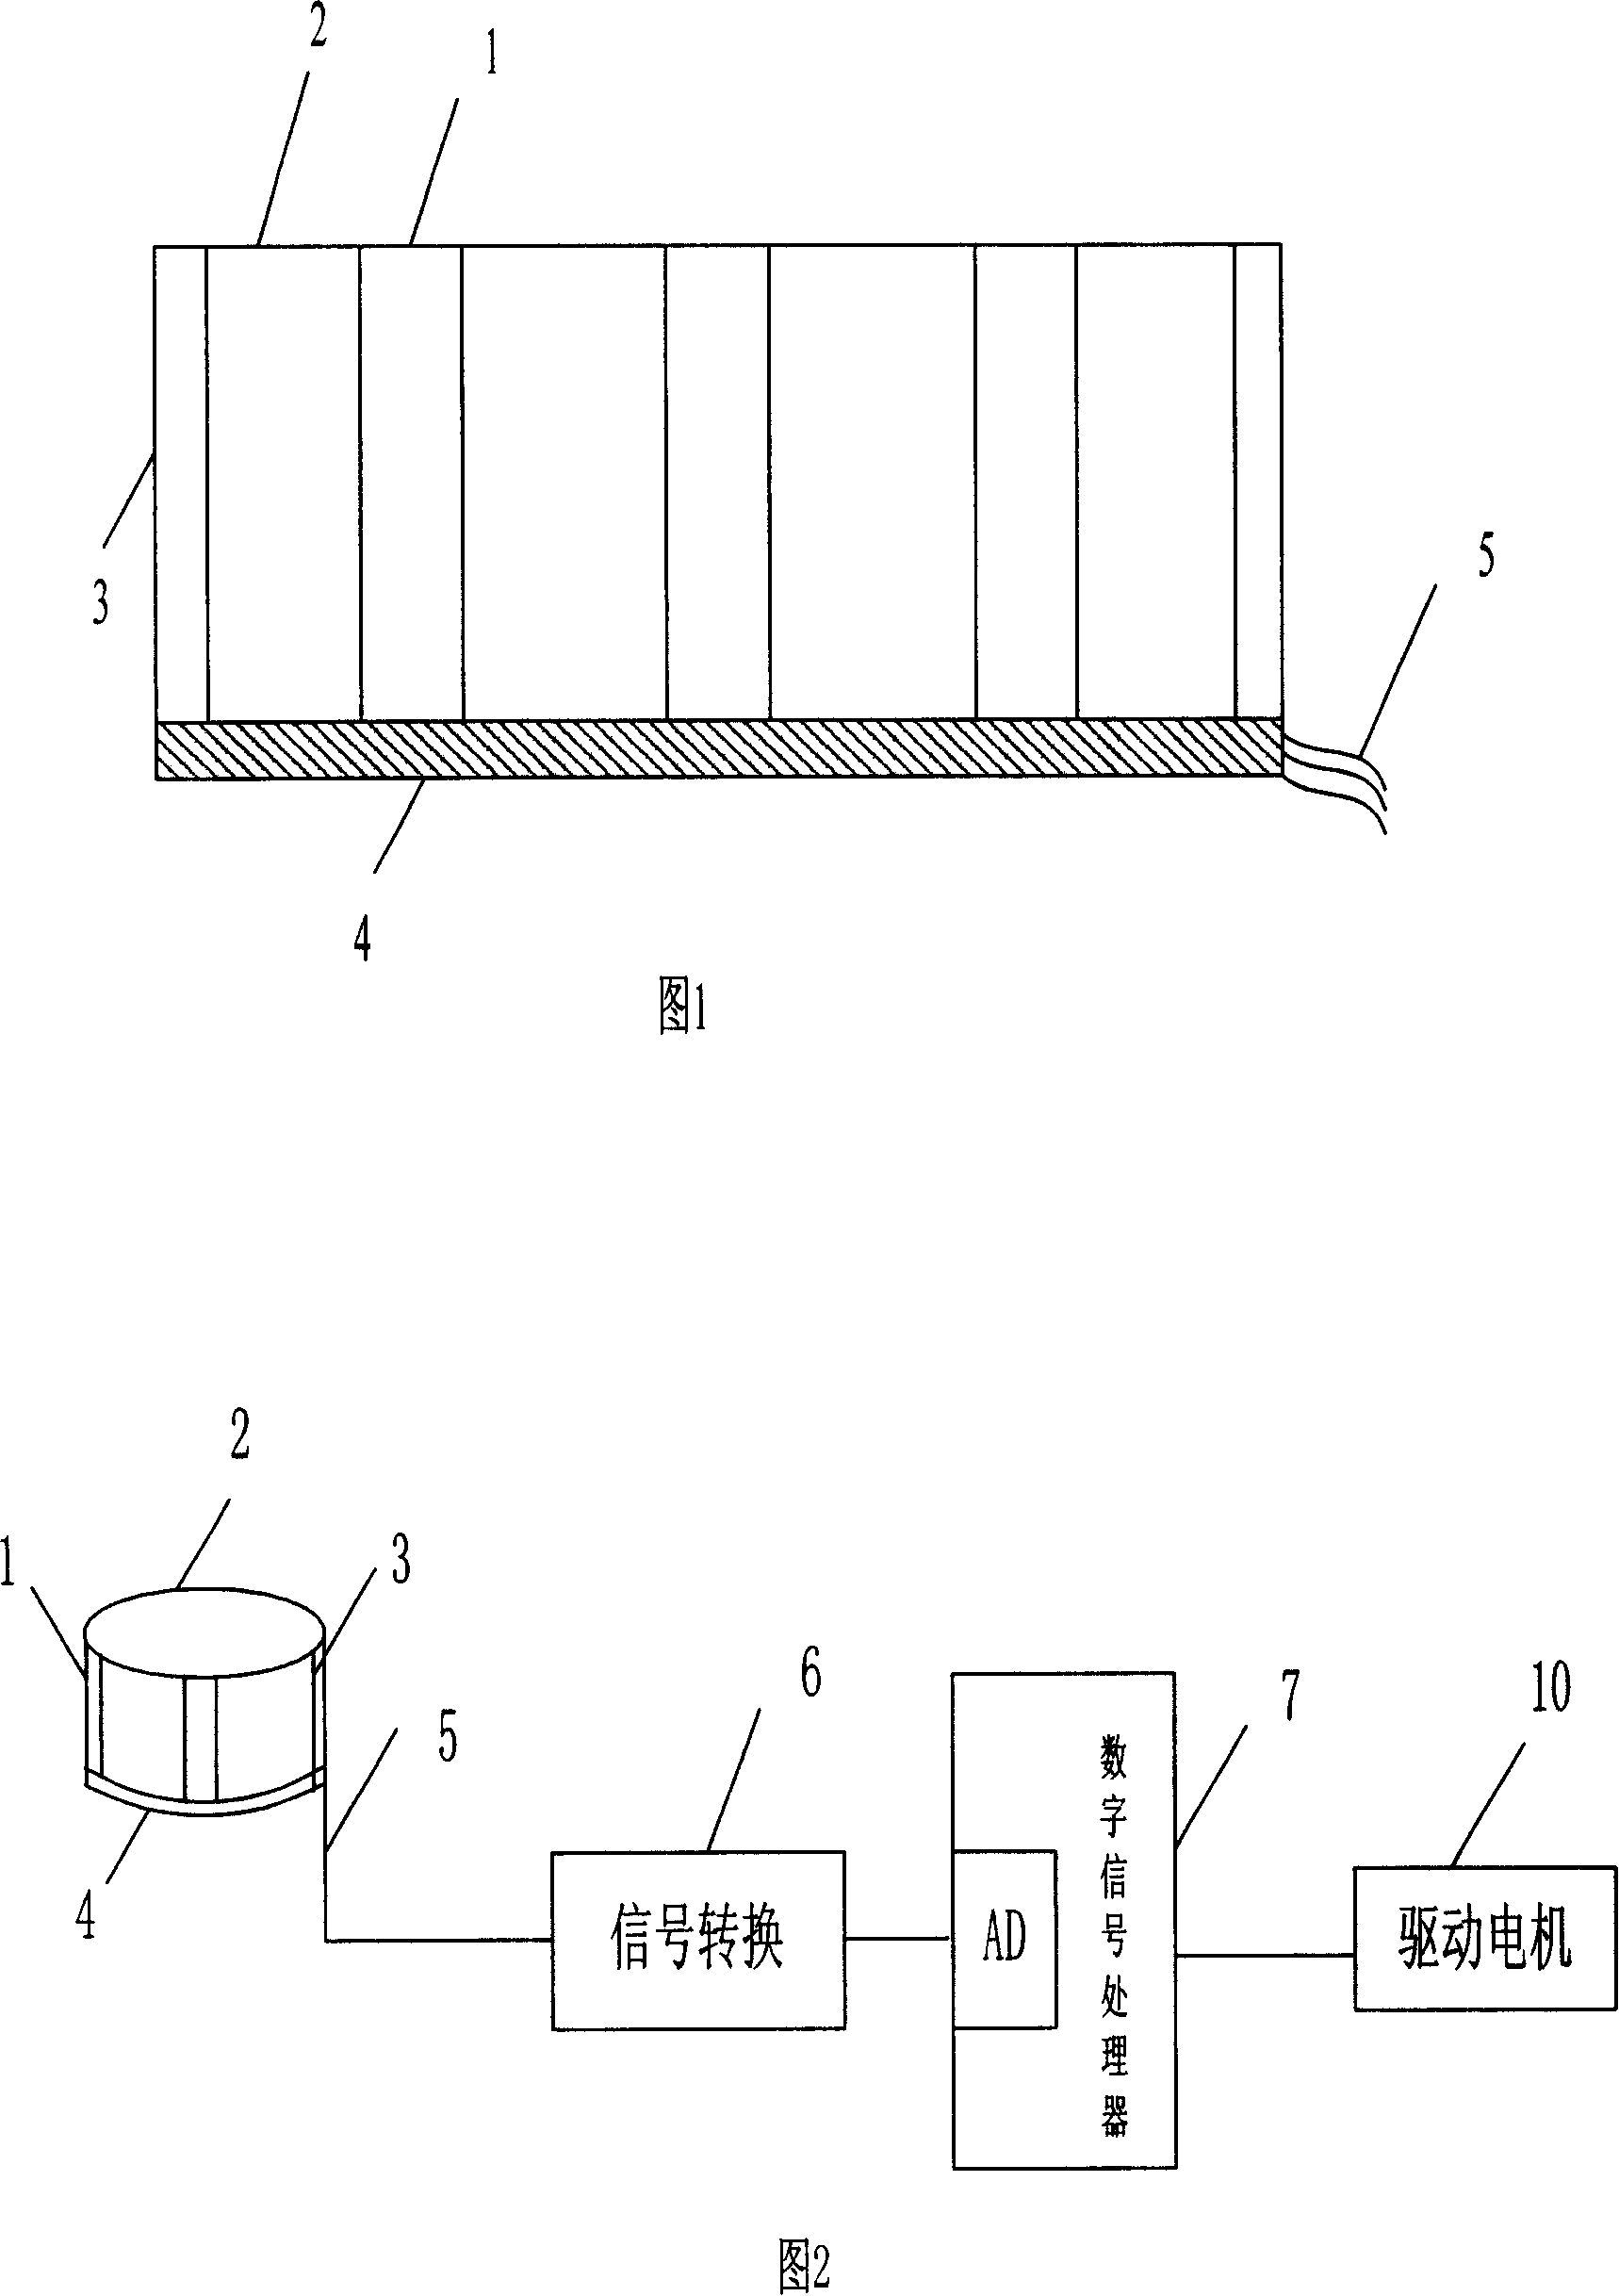 Intelligent interaction device based on action of moving body and action position detection method